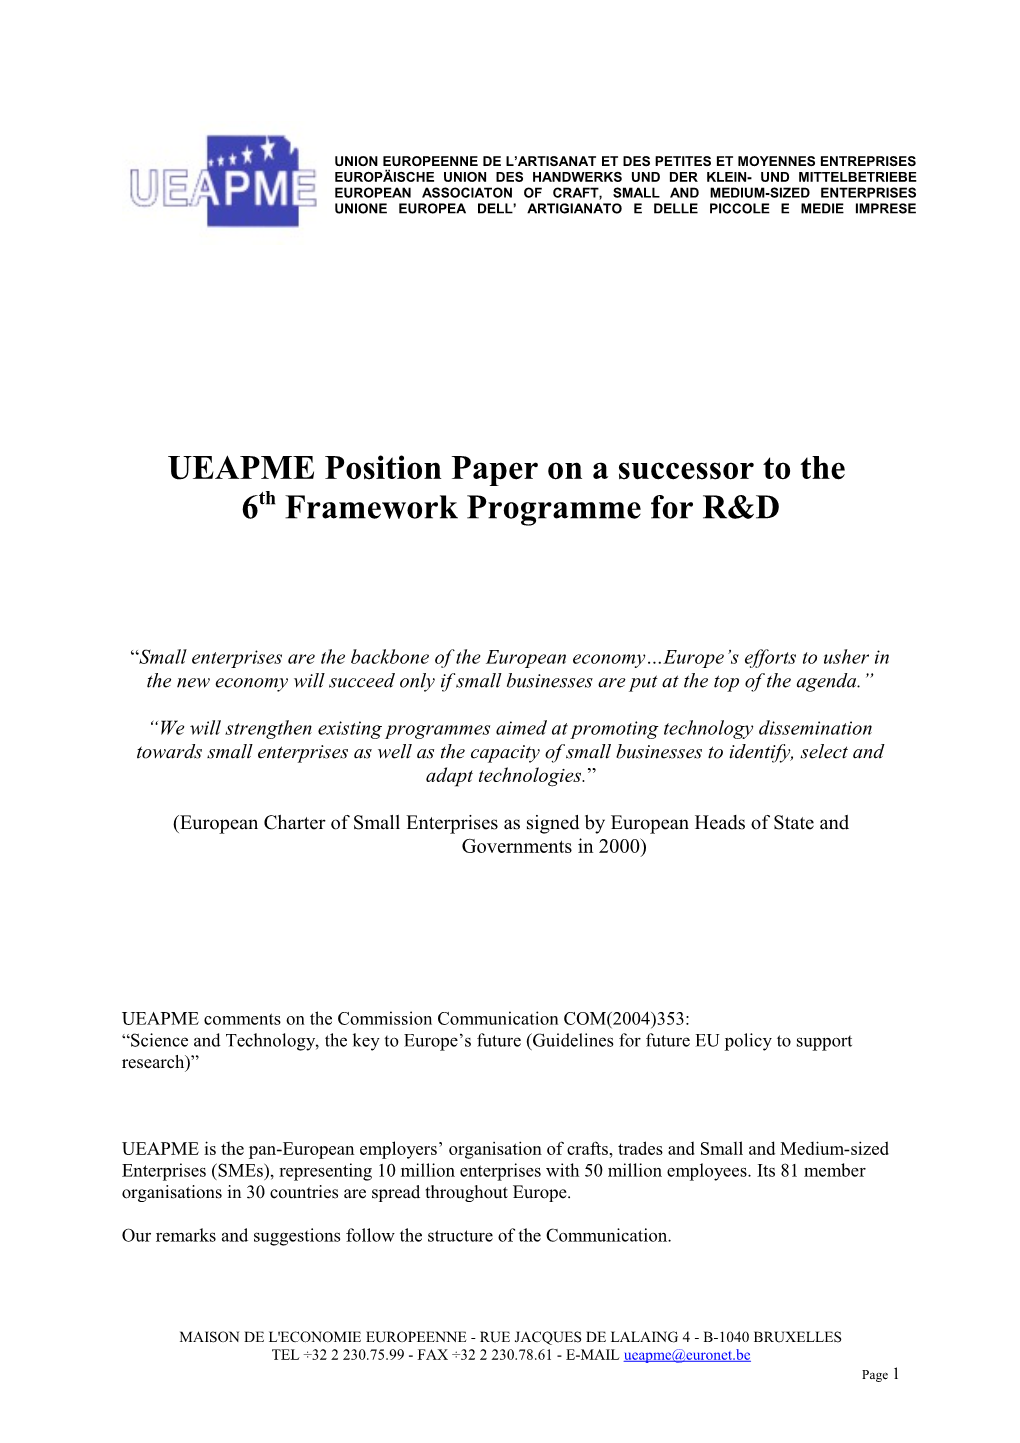 UEAPME Position Paper on a Successor to The